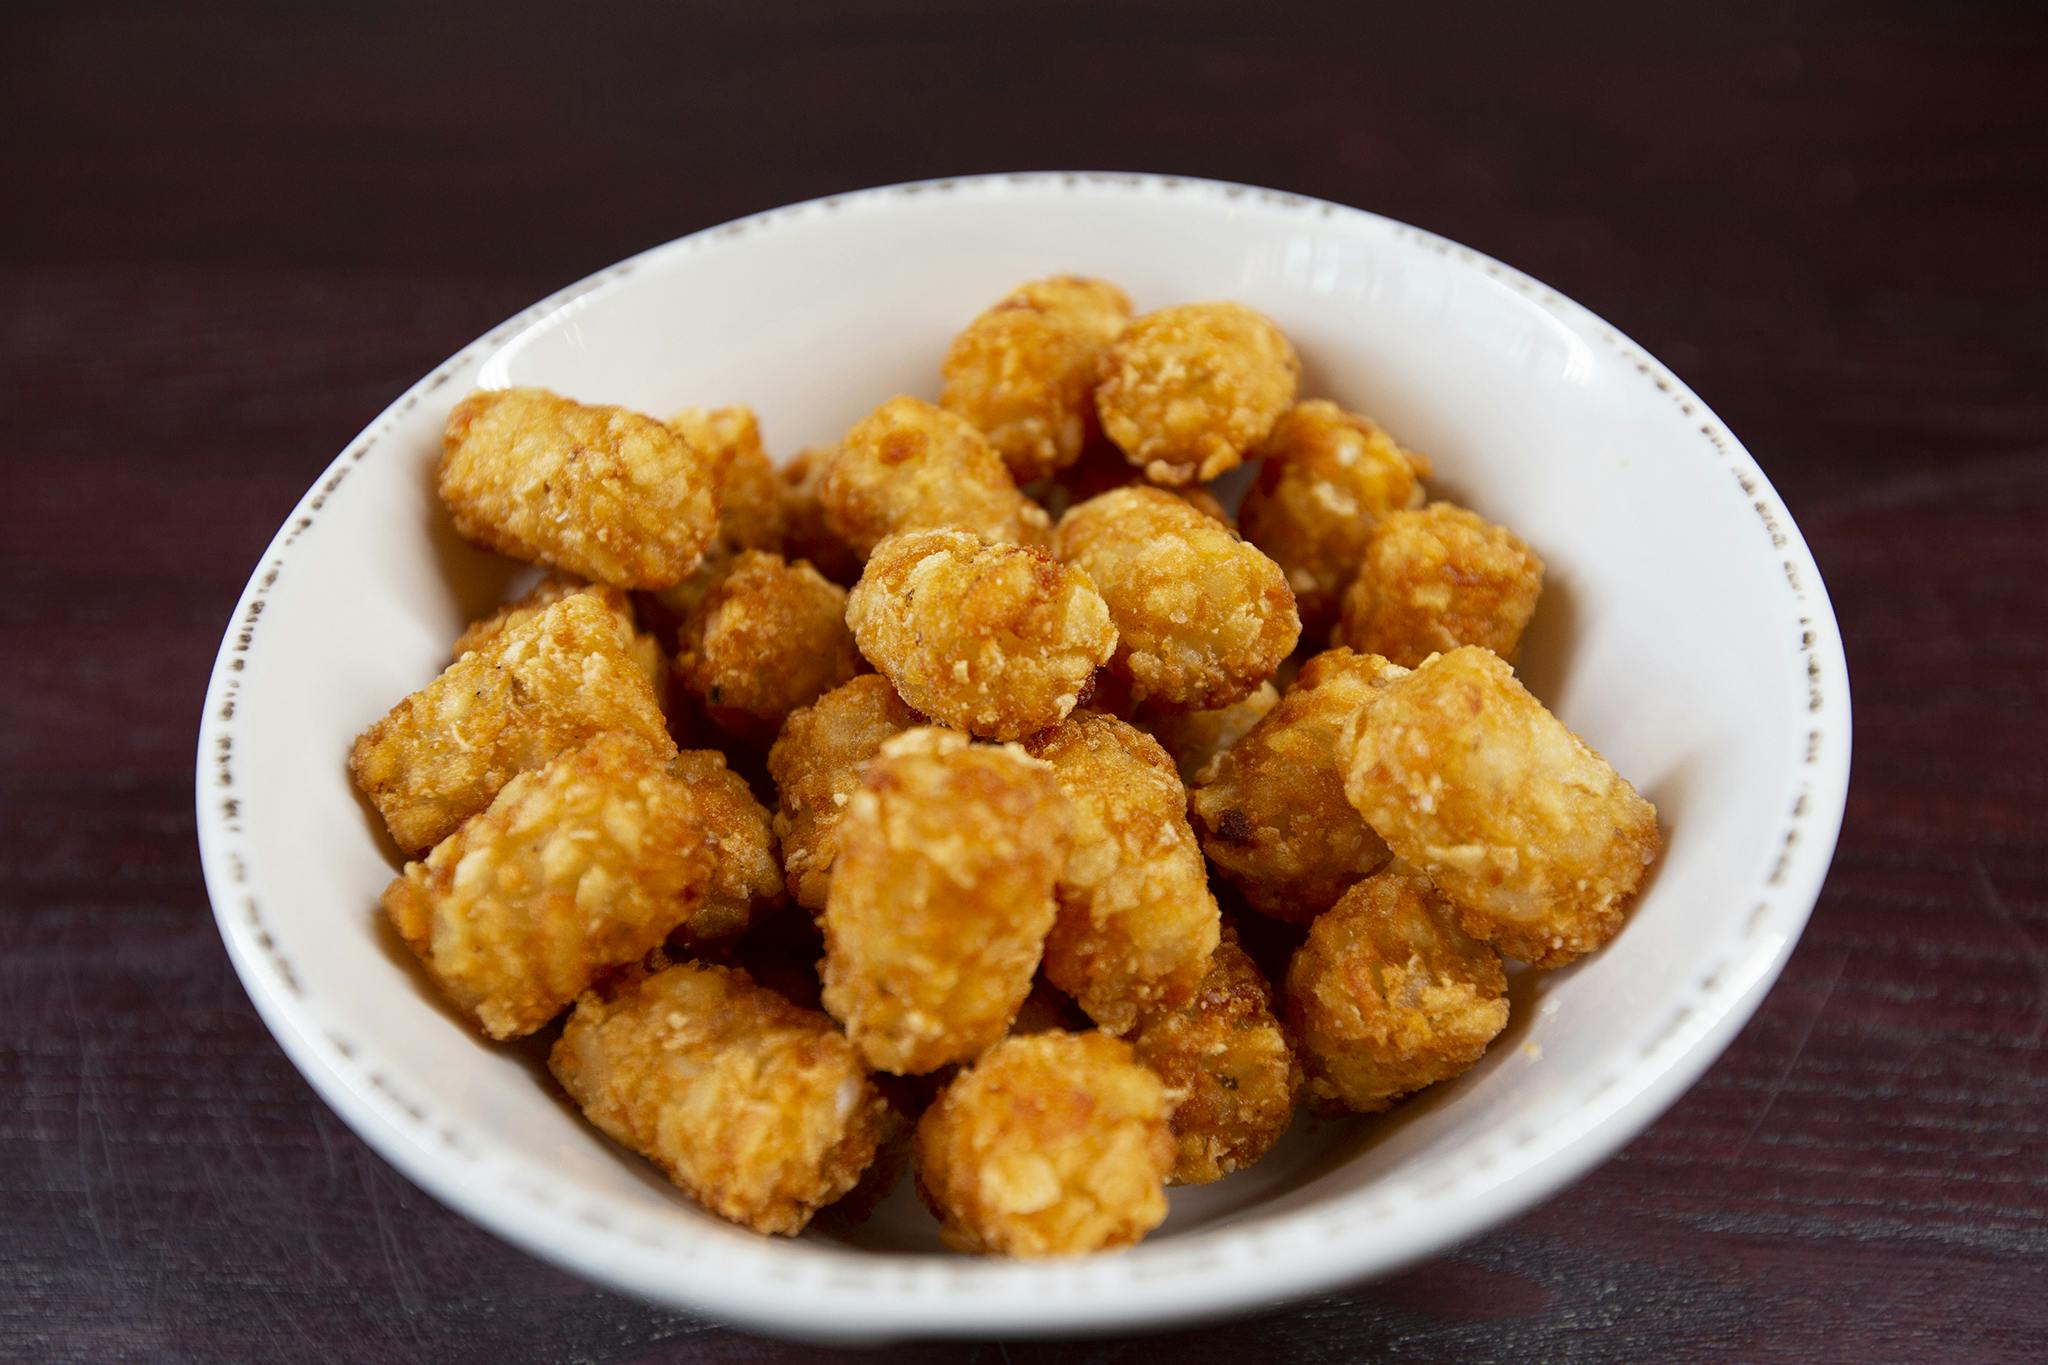 Tater Tots Side from Firehouse Grill - Chicago Ave in Evanston, IL